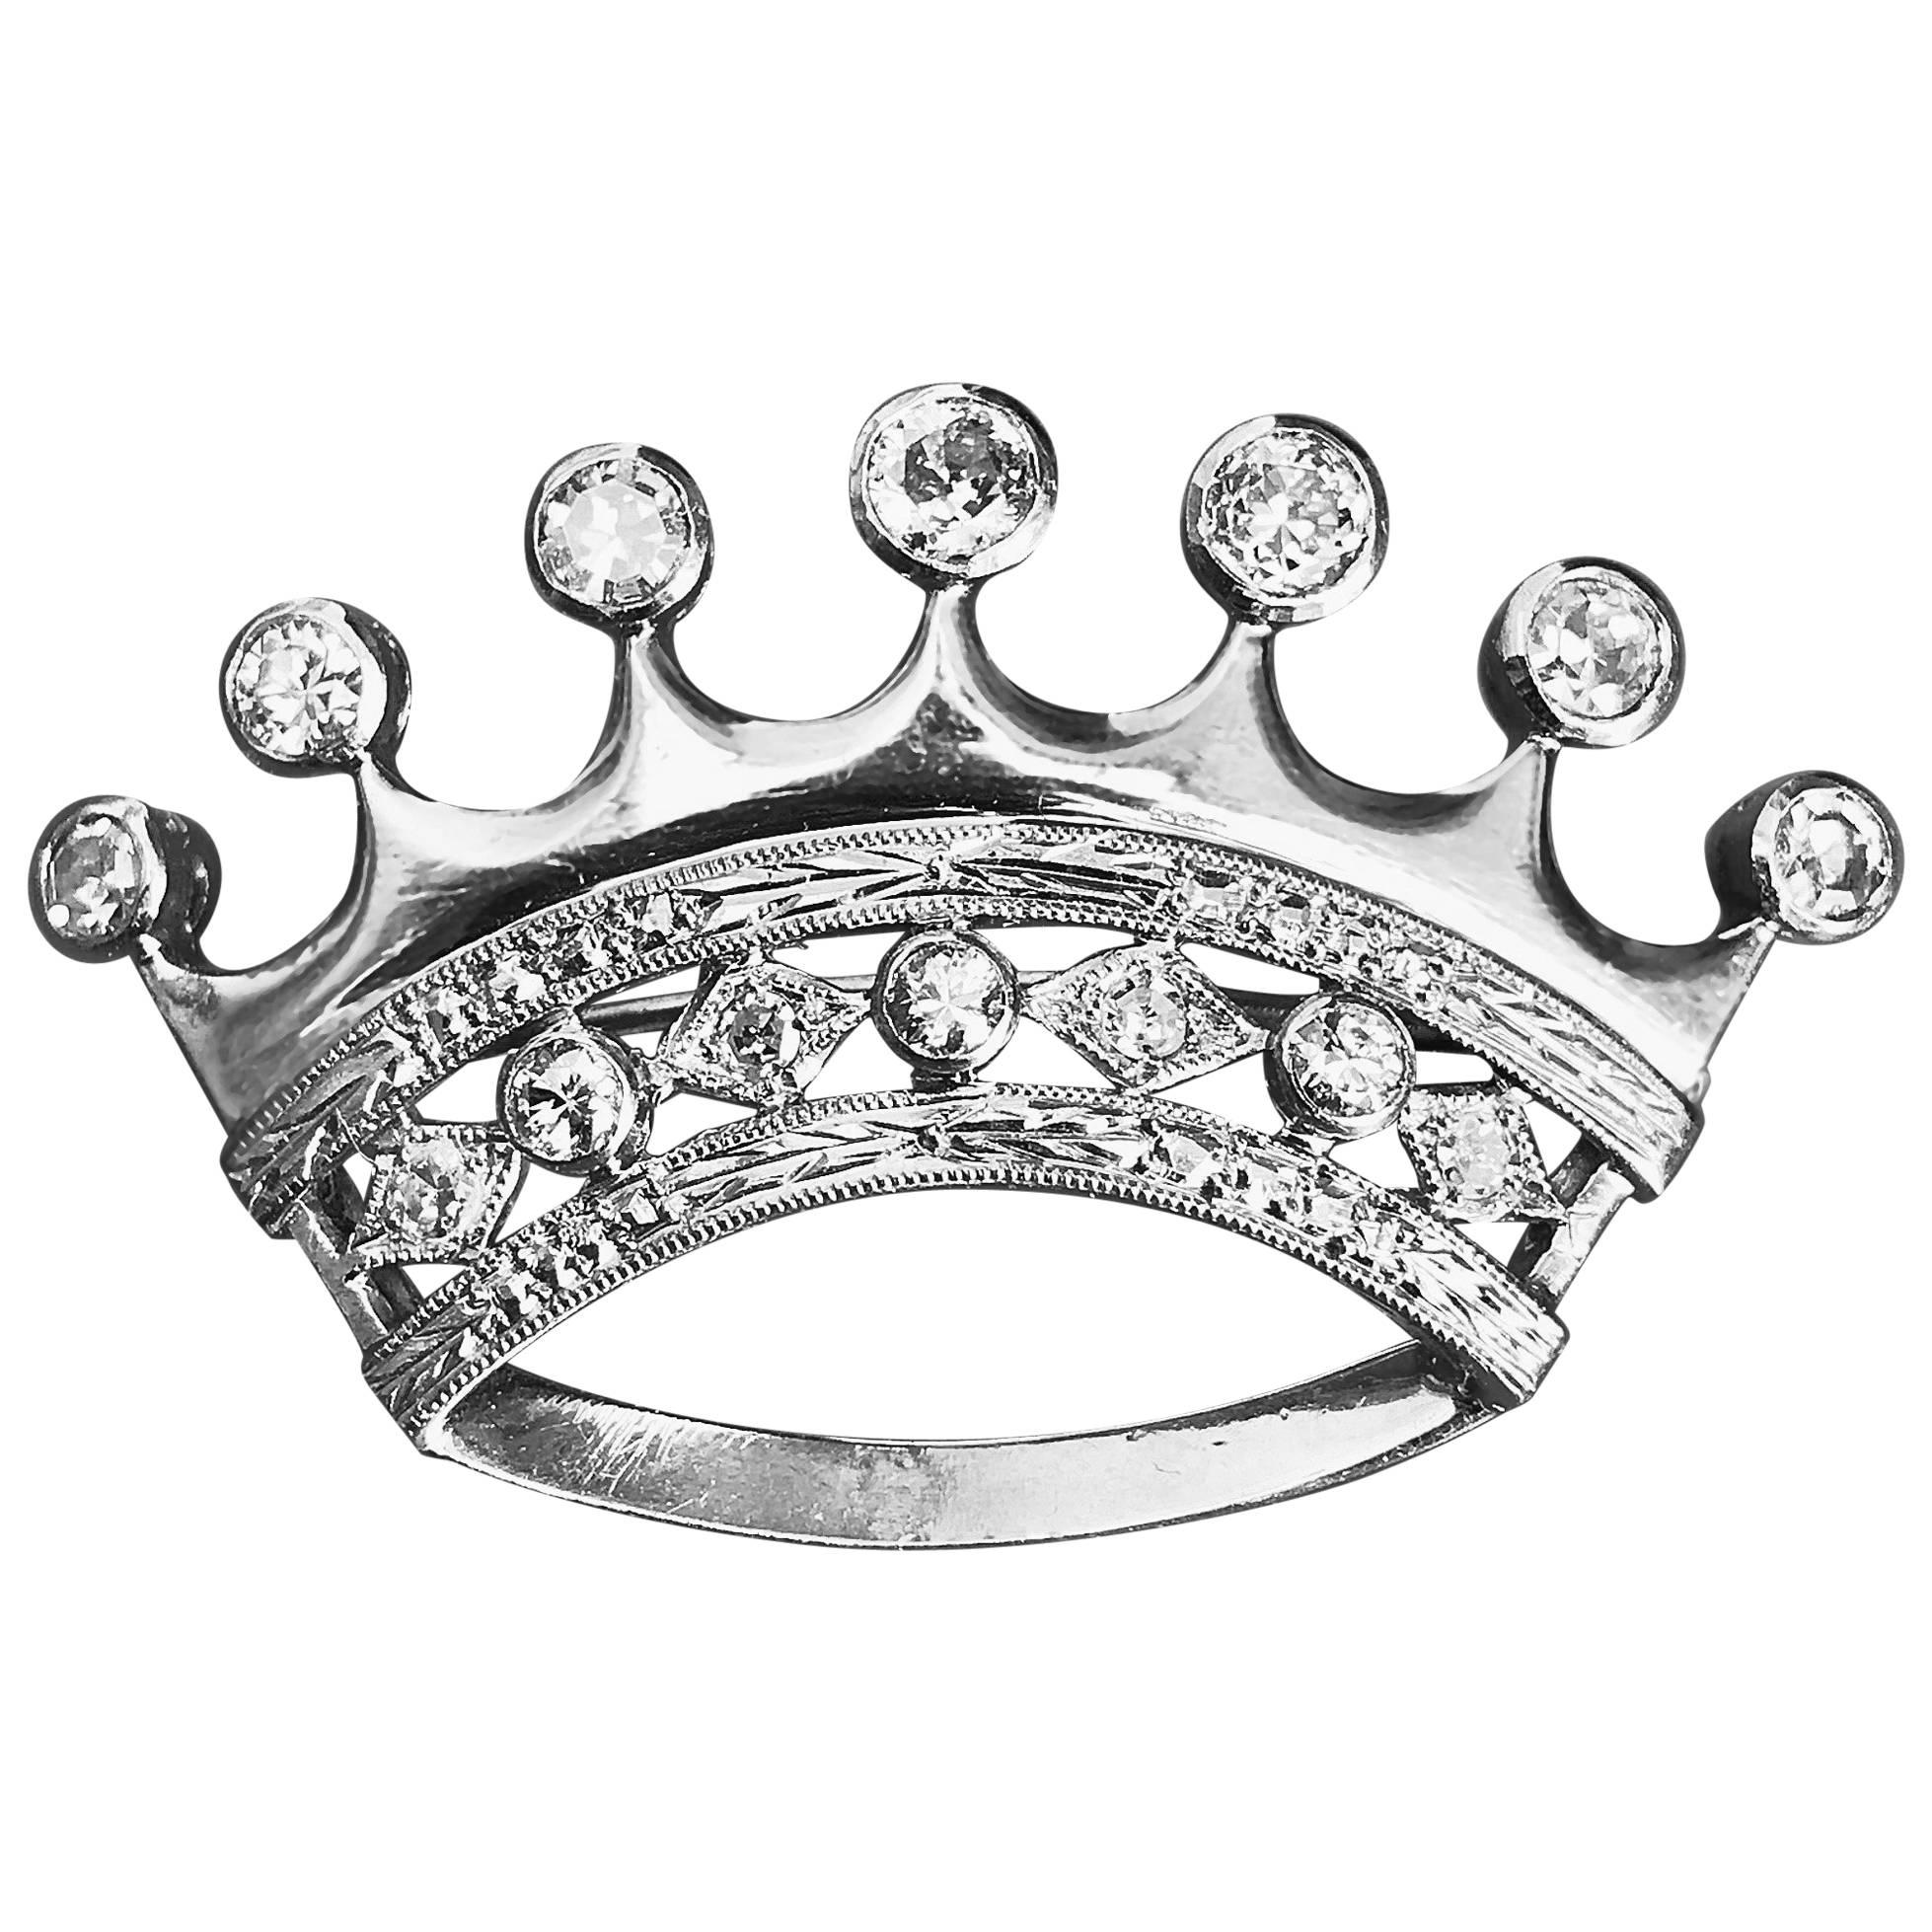 18-Karat Brooch in White Gold and Diamonds, Crown-Shaped Pins